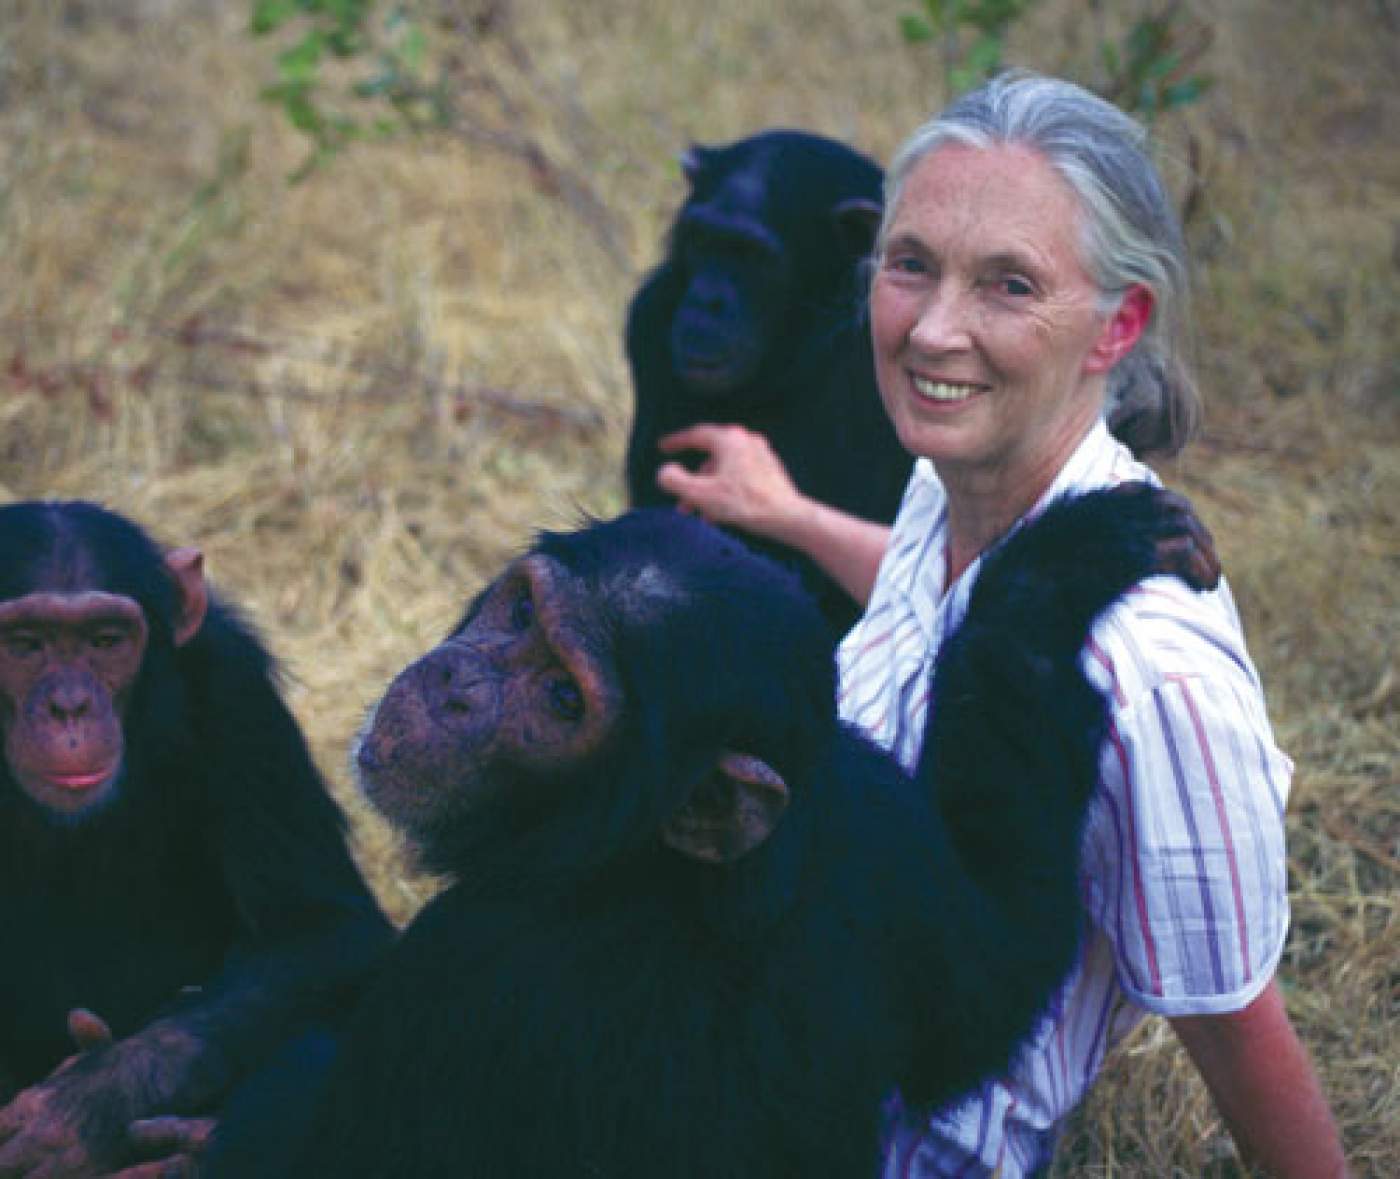 A Chronological Look at the Life of Jane Goodall